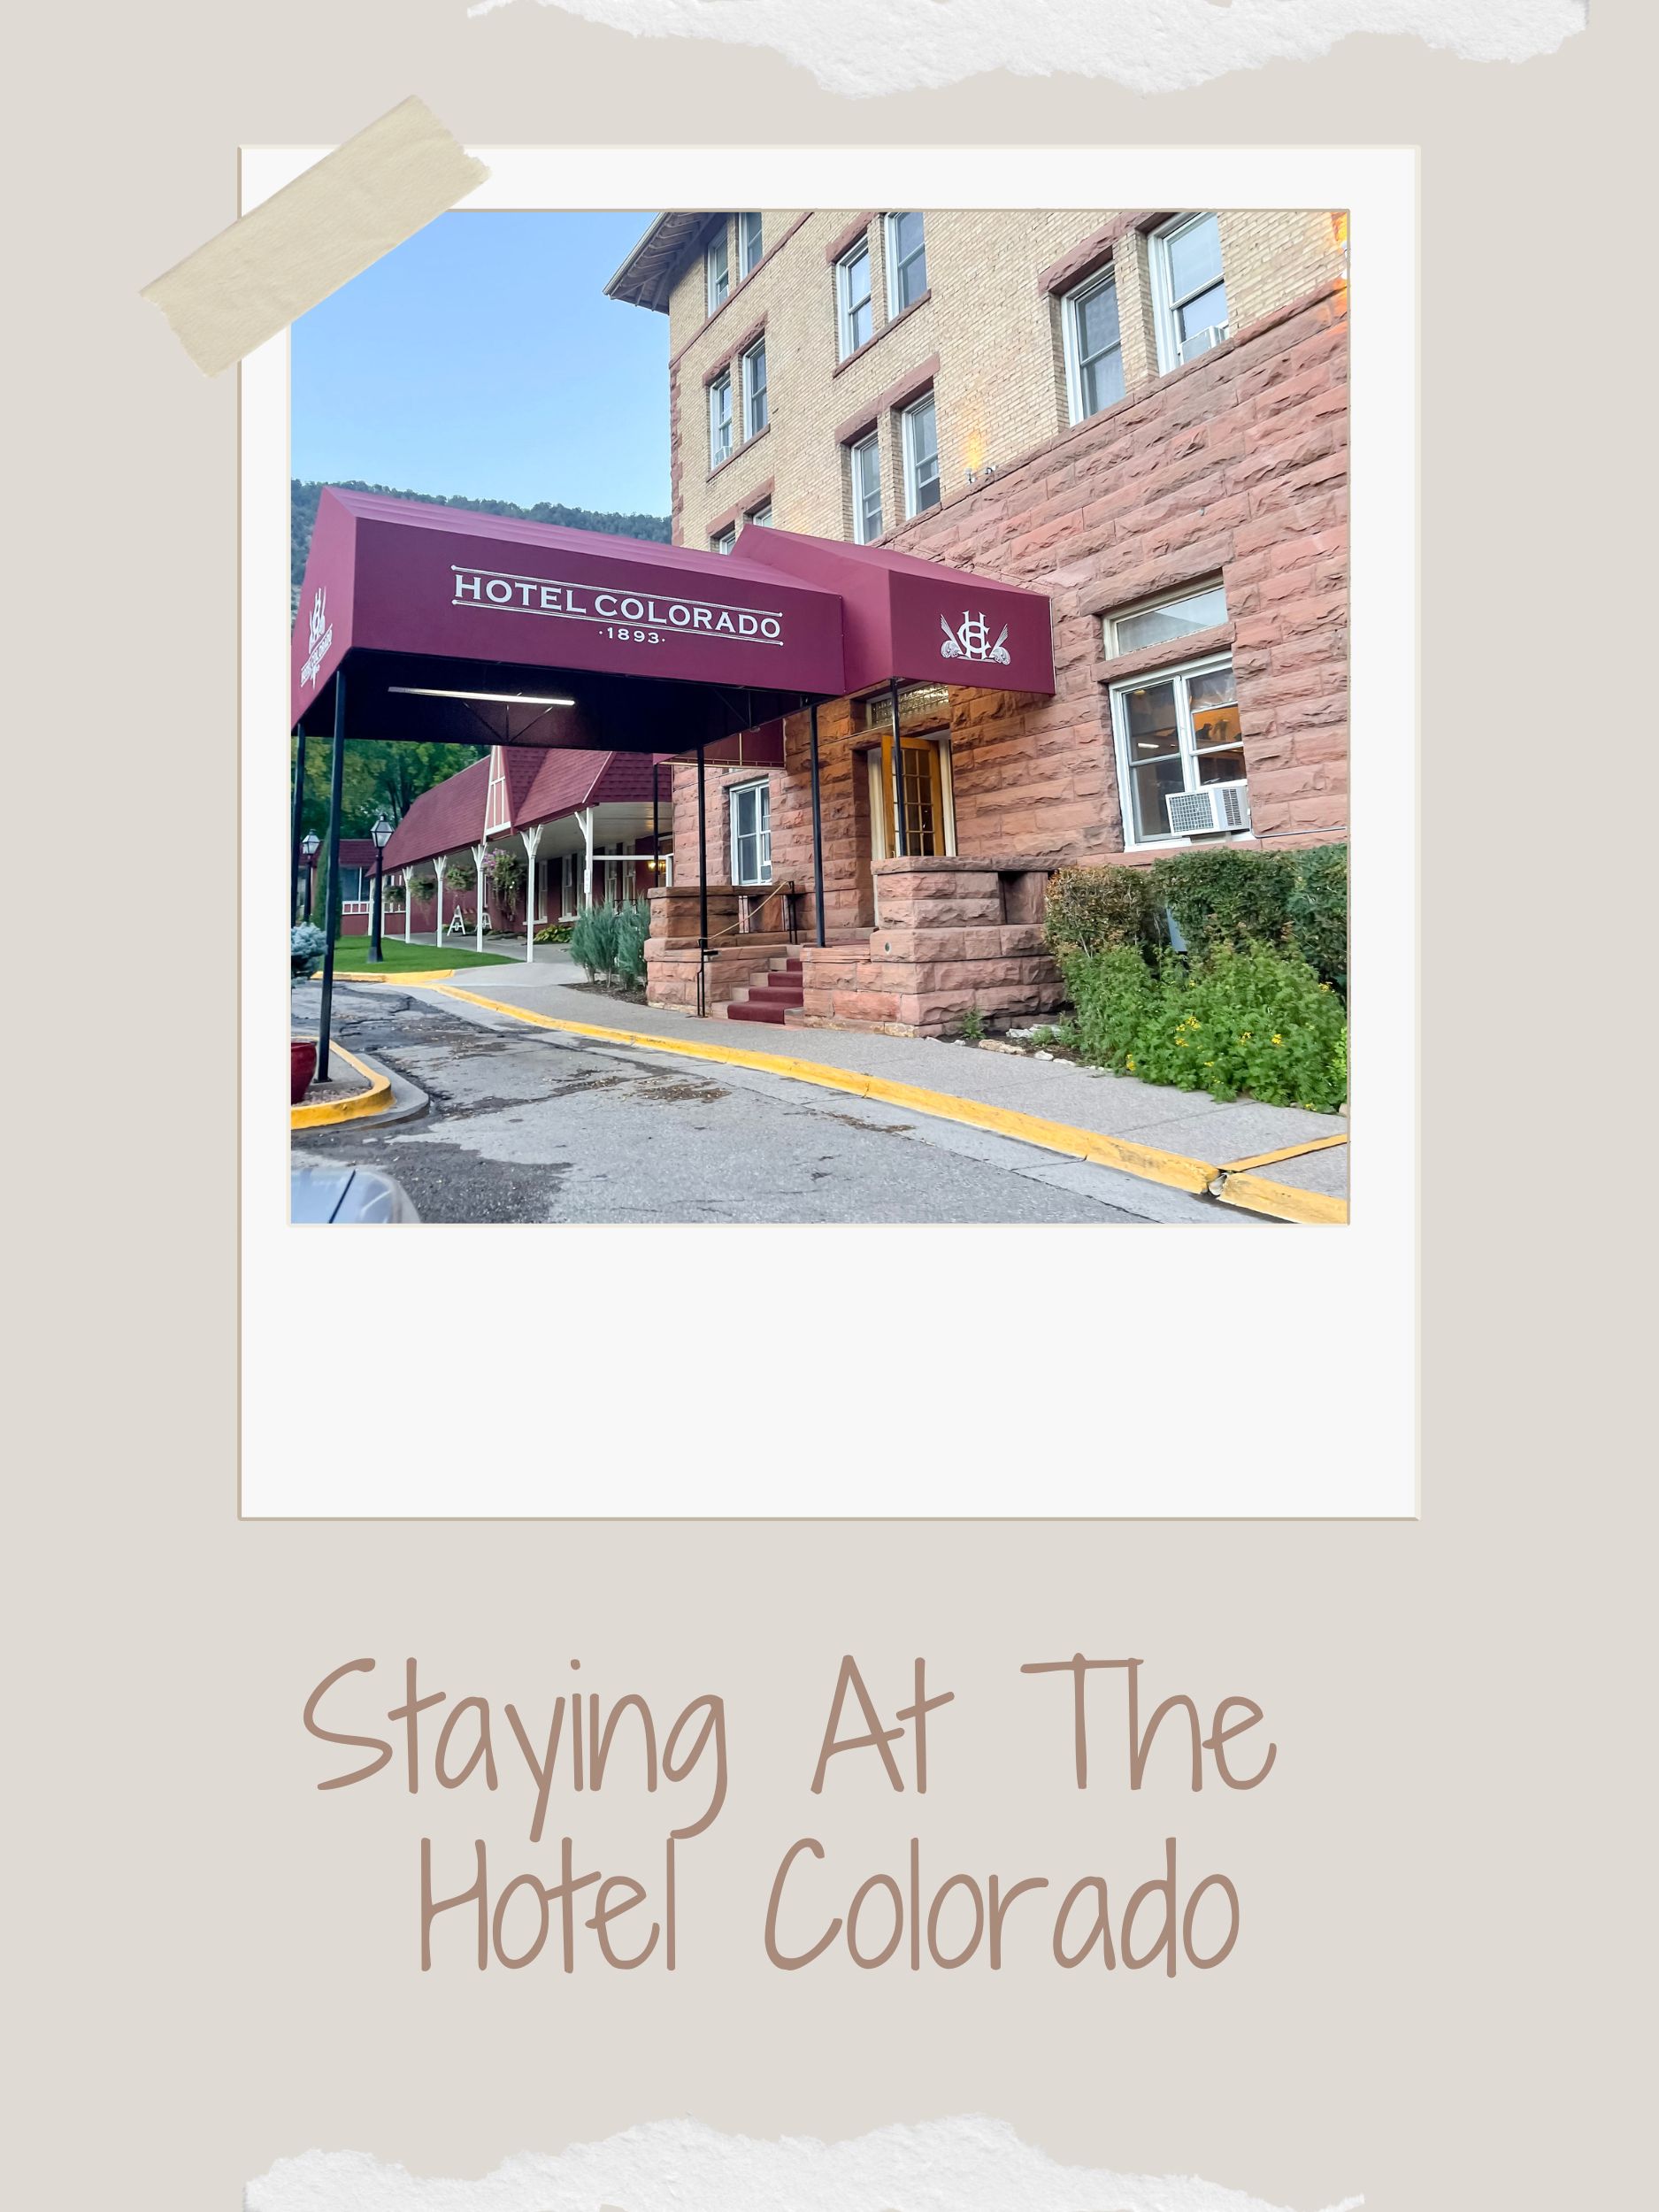 Staying at the Hotel Colorado